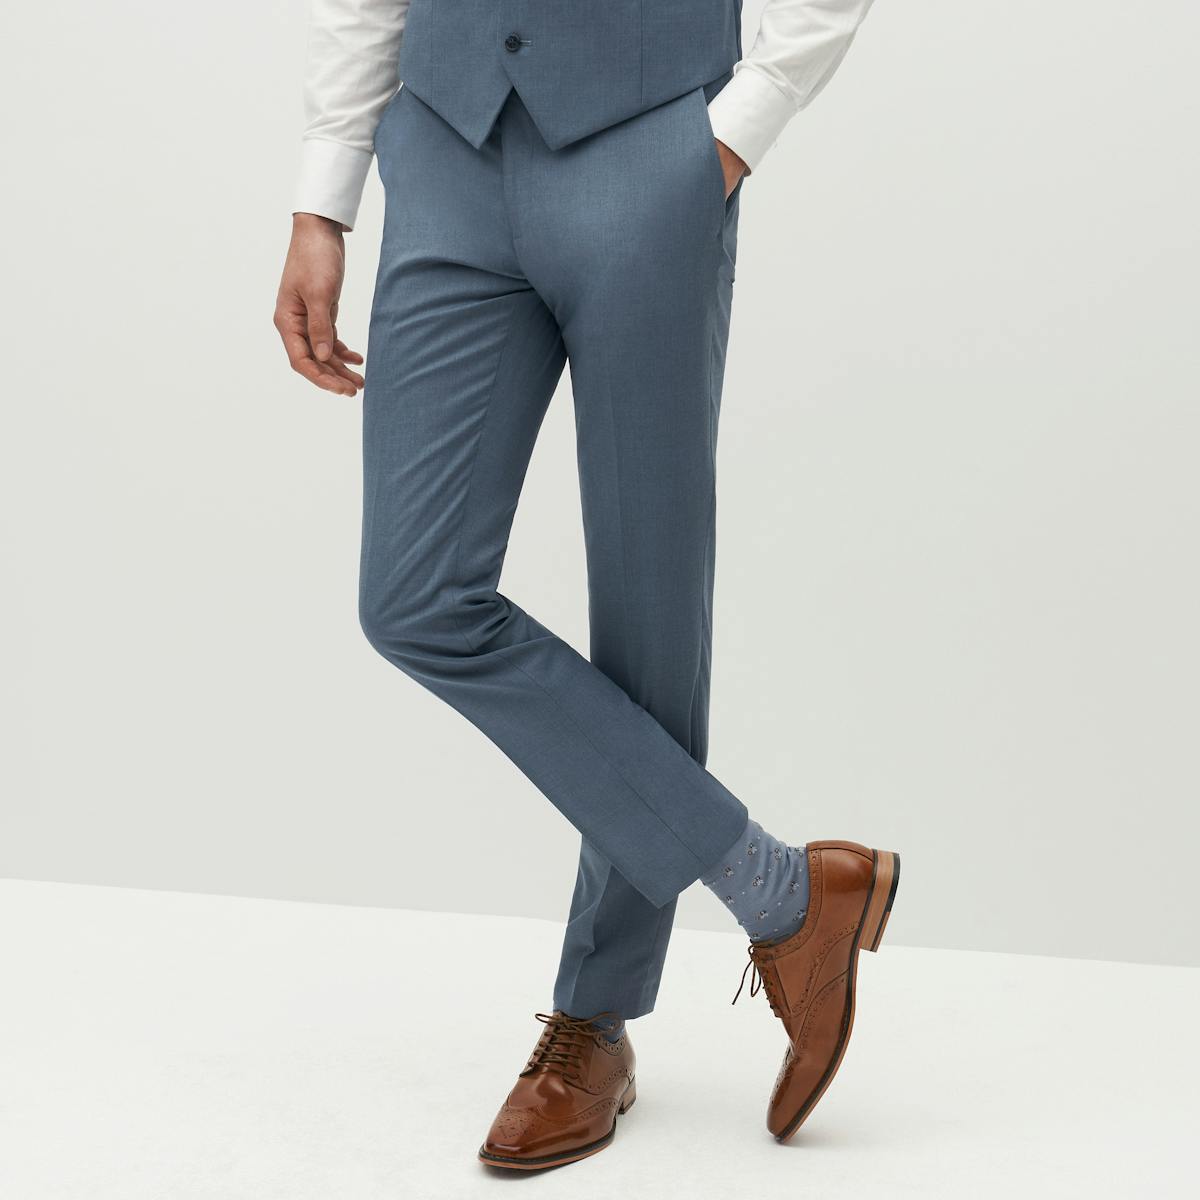 Light Blue Dress Pants with Shoes Smart Casual Outfits For Men In